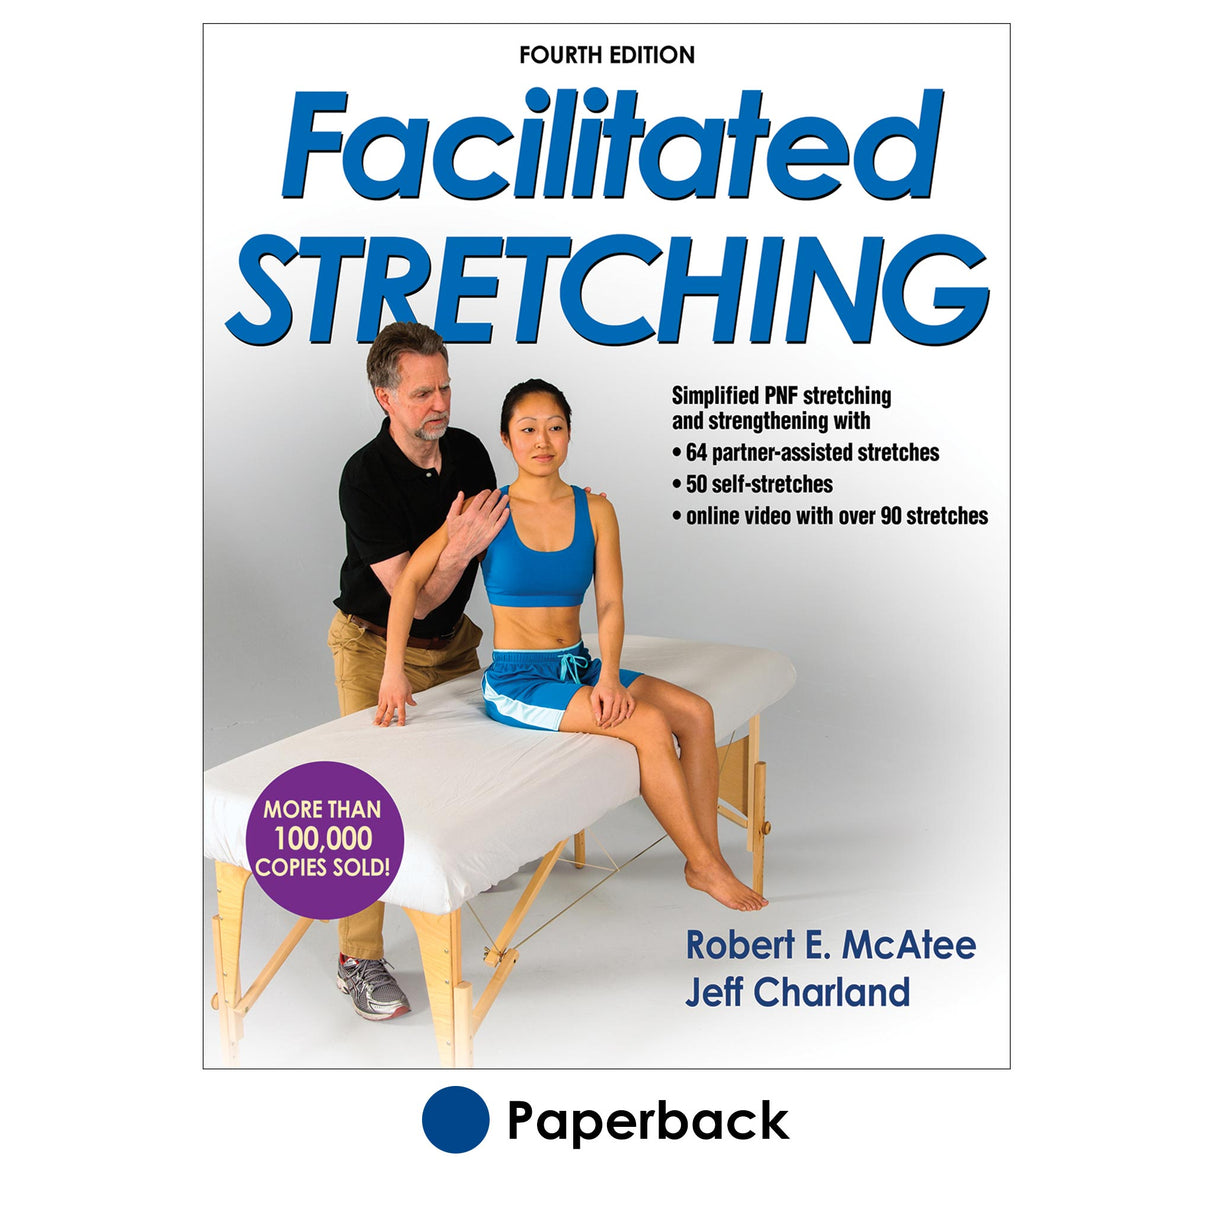 Facilitated Stretching-4th Edition With Online Video